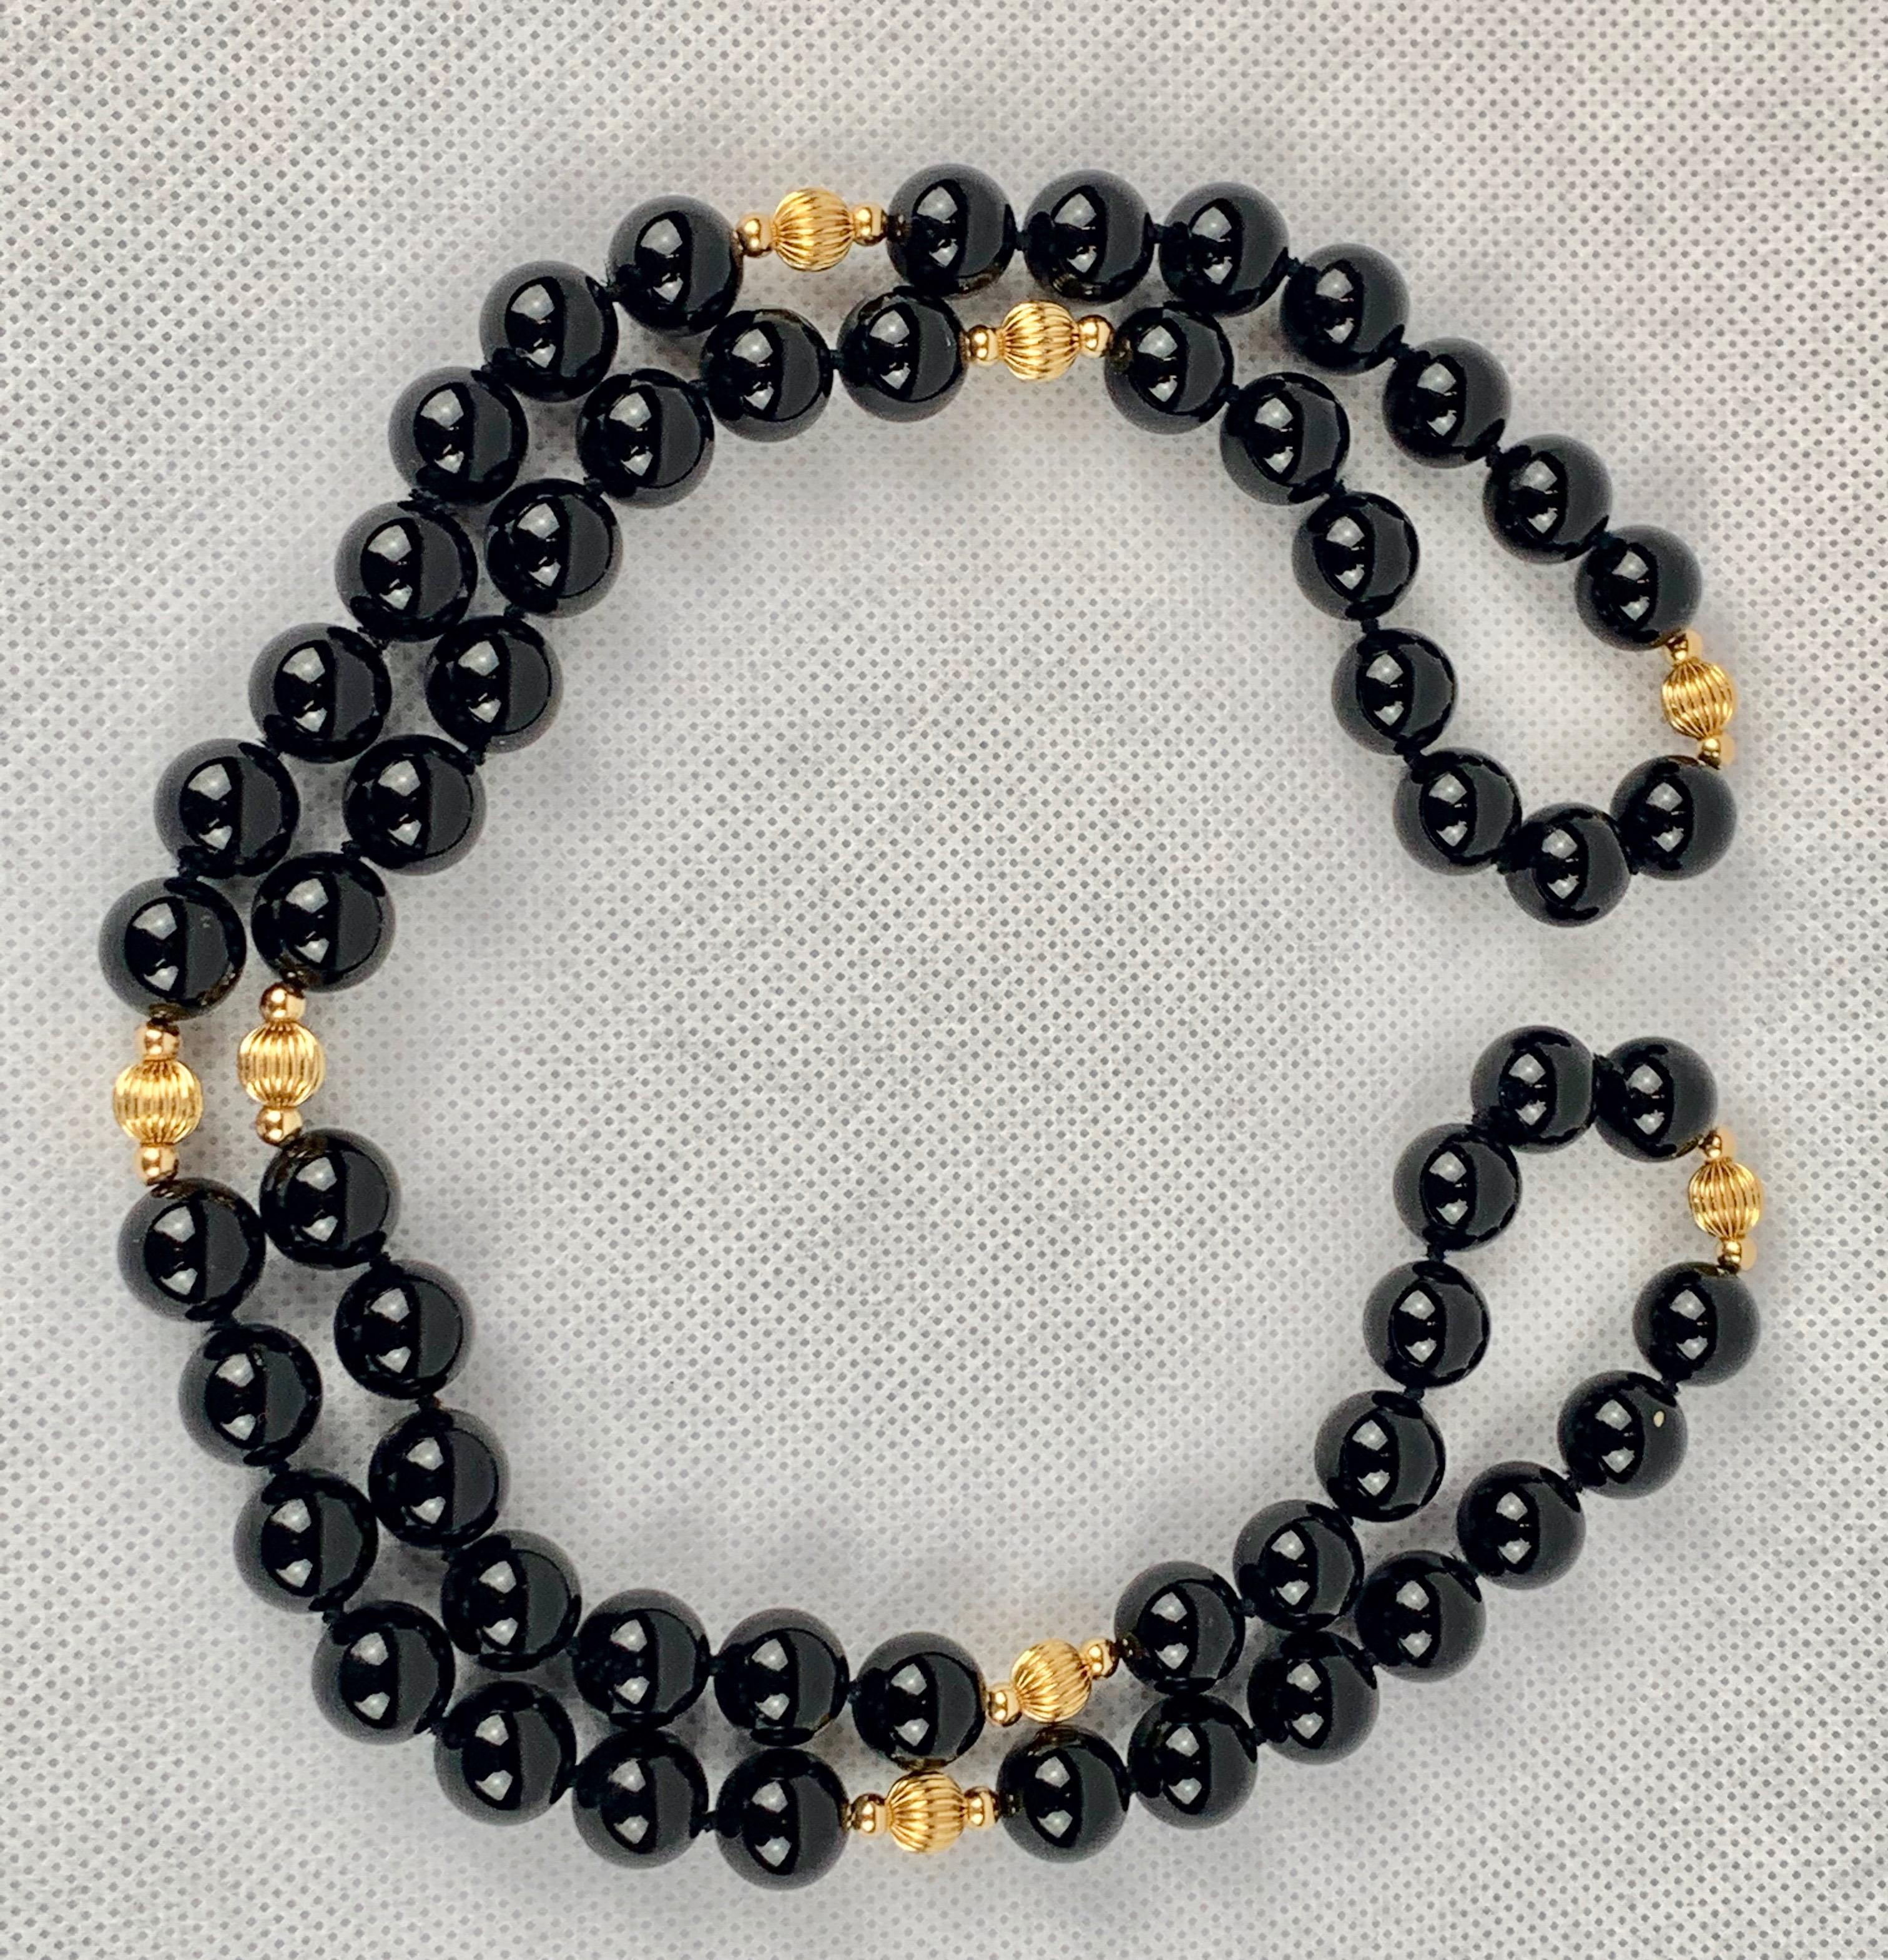 Women's Strand of Black Onyx and 14 Karat Gold Spacers